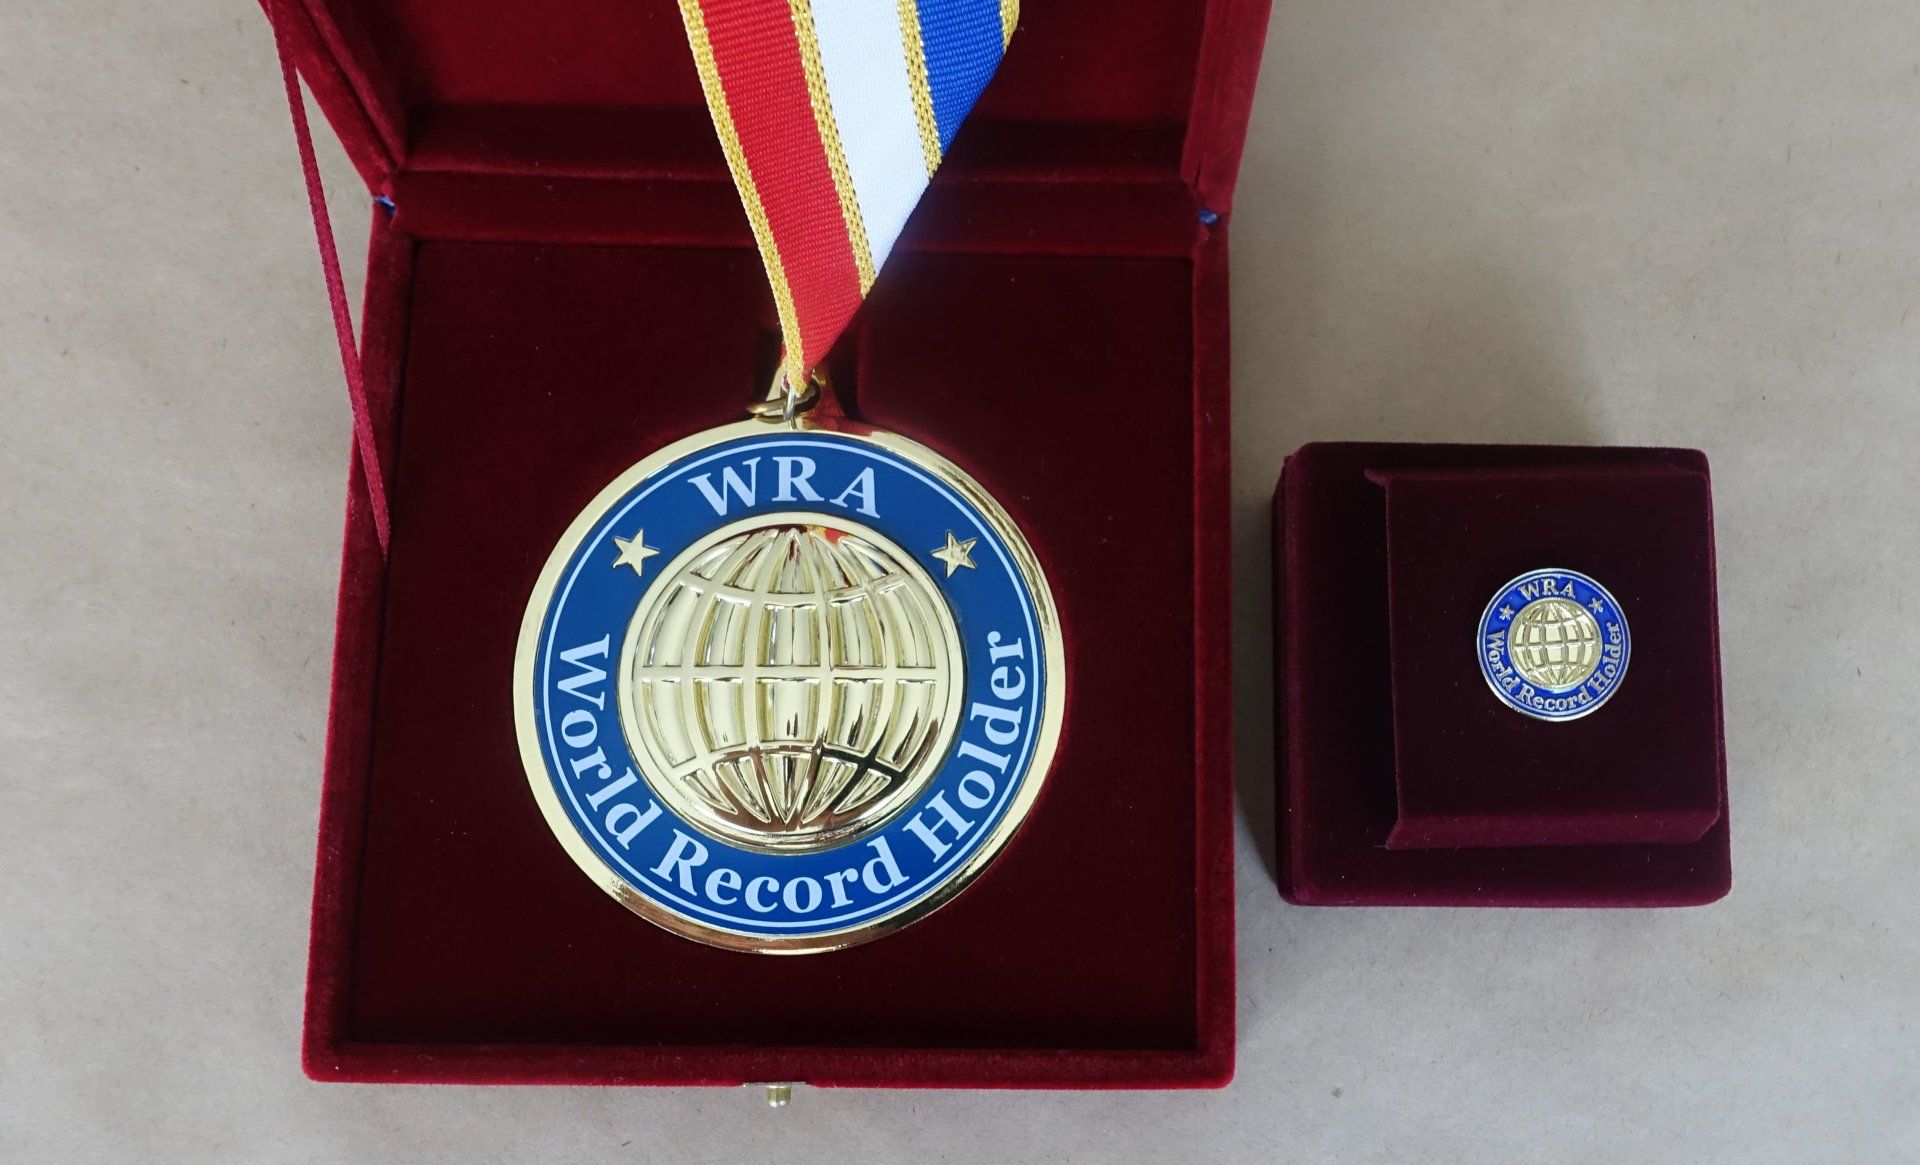   World Record Holder Medal & World Record Holder Pin for Mrs. Suzy Seeley, the new record holder for the Most Marathons Run Under Four Hours  (Female). Photo: AOWR